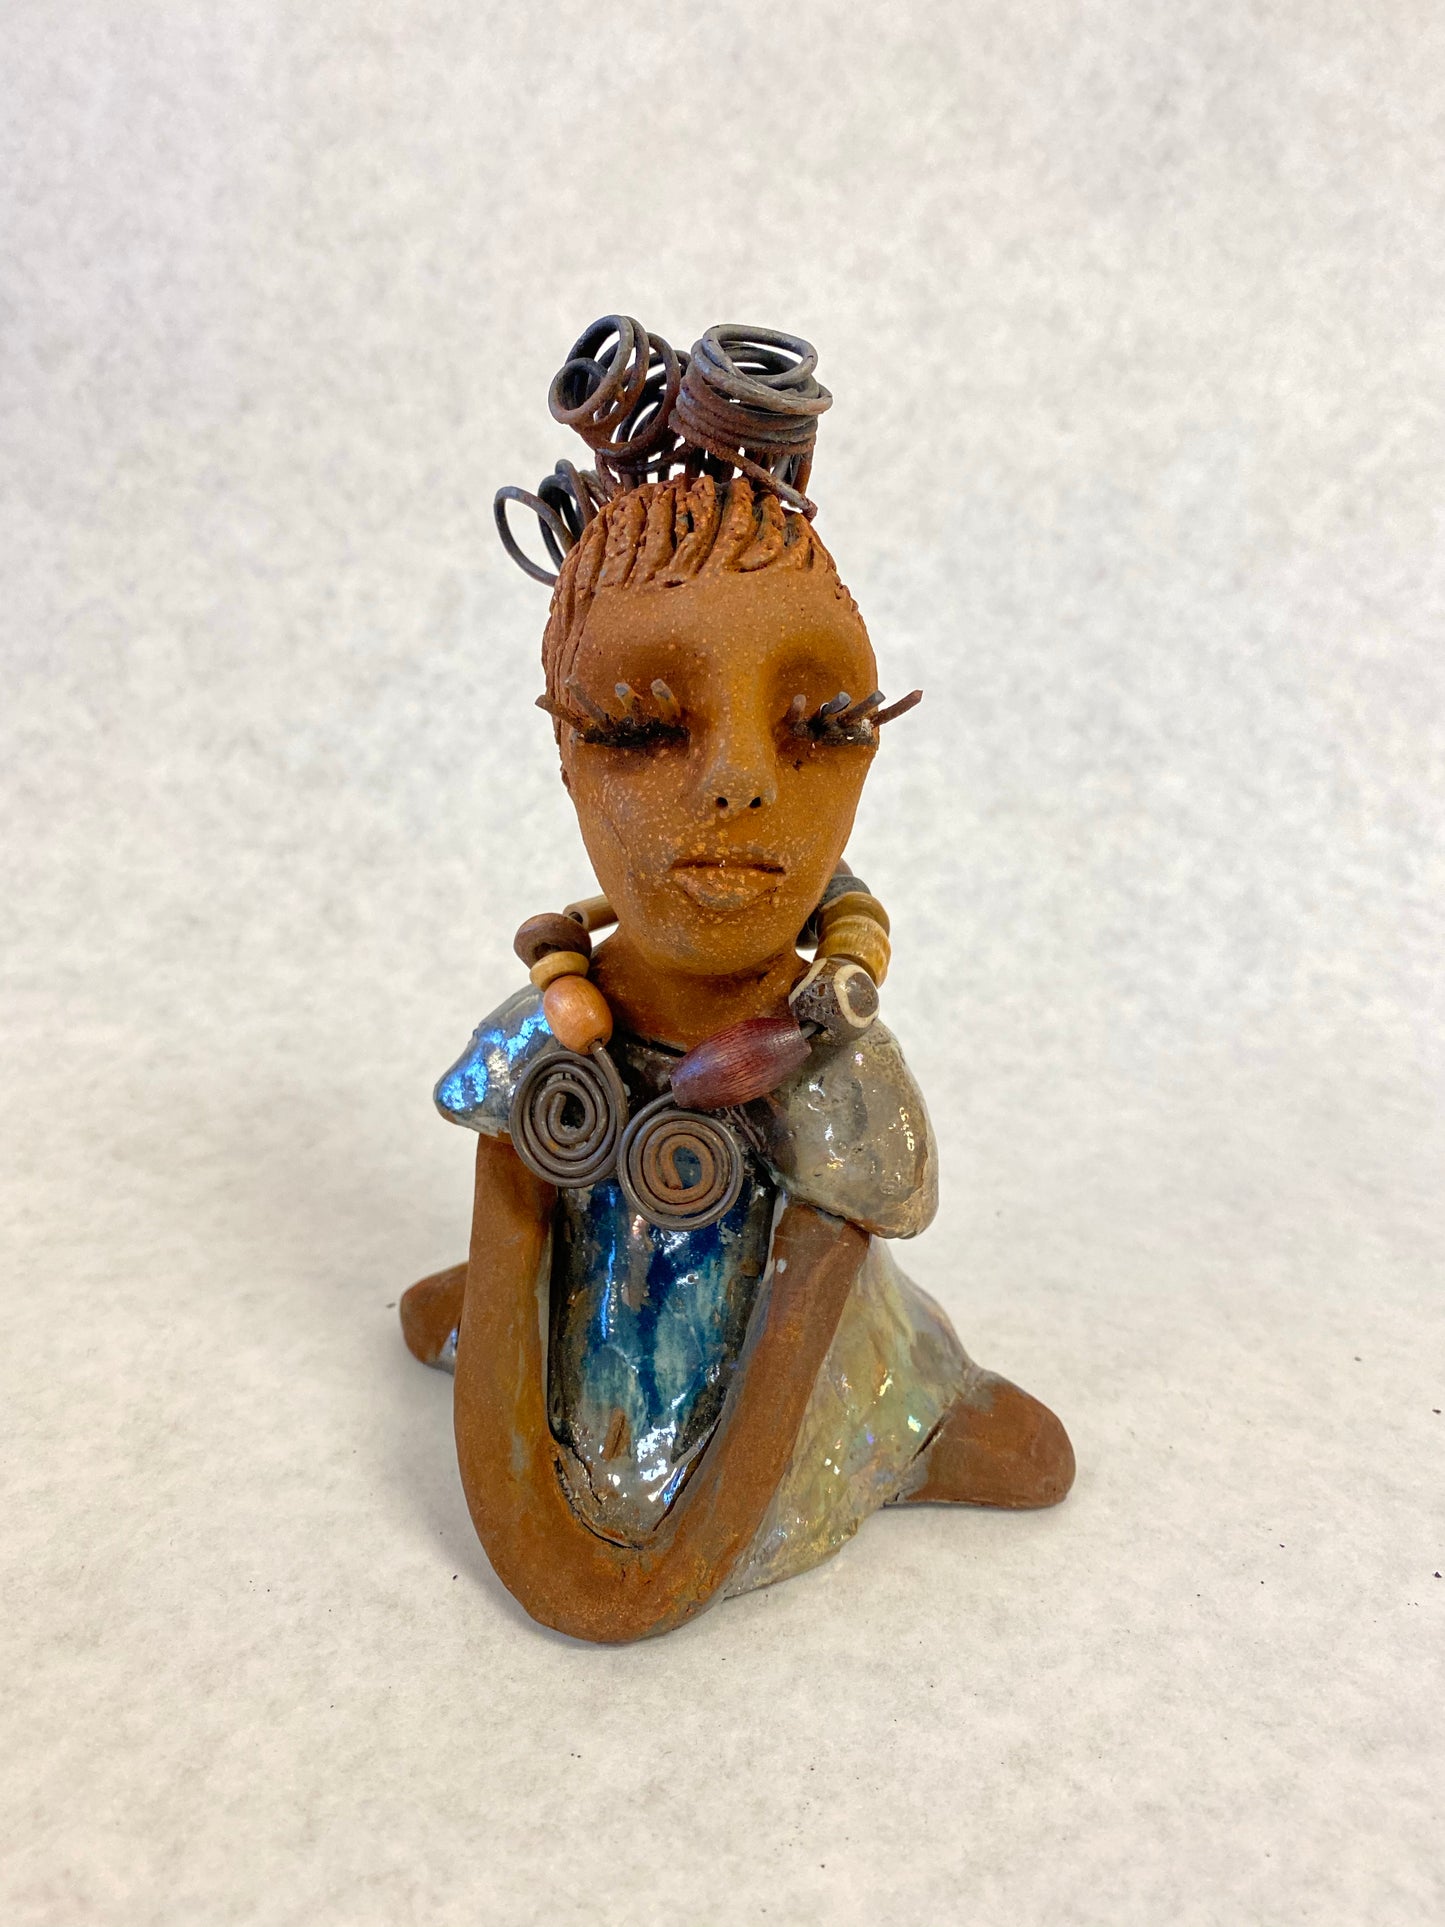 Janet stands 6" x 4" x 4" and weighs 14 ozs. Janet has a honey brown complexion with wire hair. She wears long lashes and has a alligator green metallic dress. She wears an awesome wood bead necklace. Janet has her long loving arms around her knees as she rest and waits.